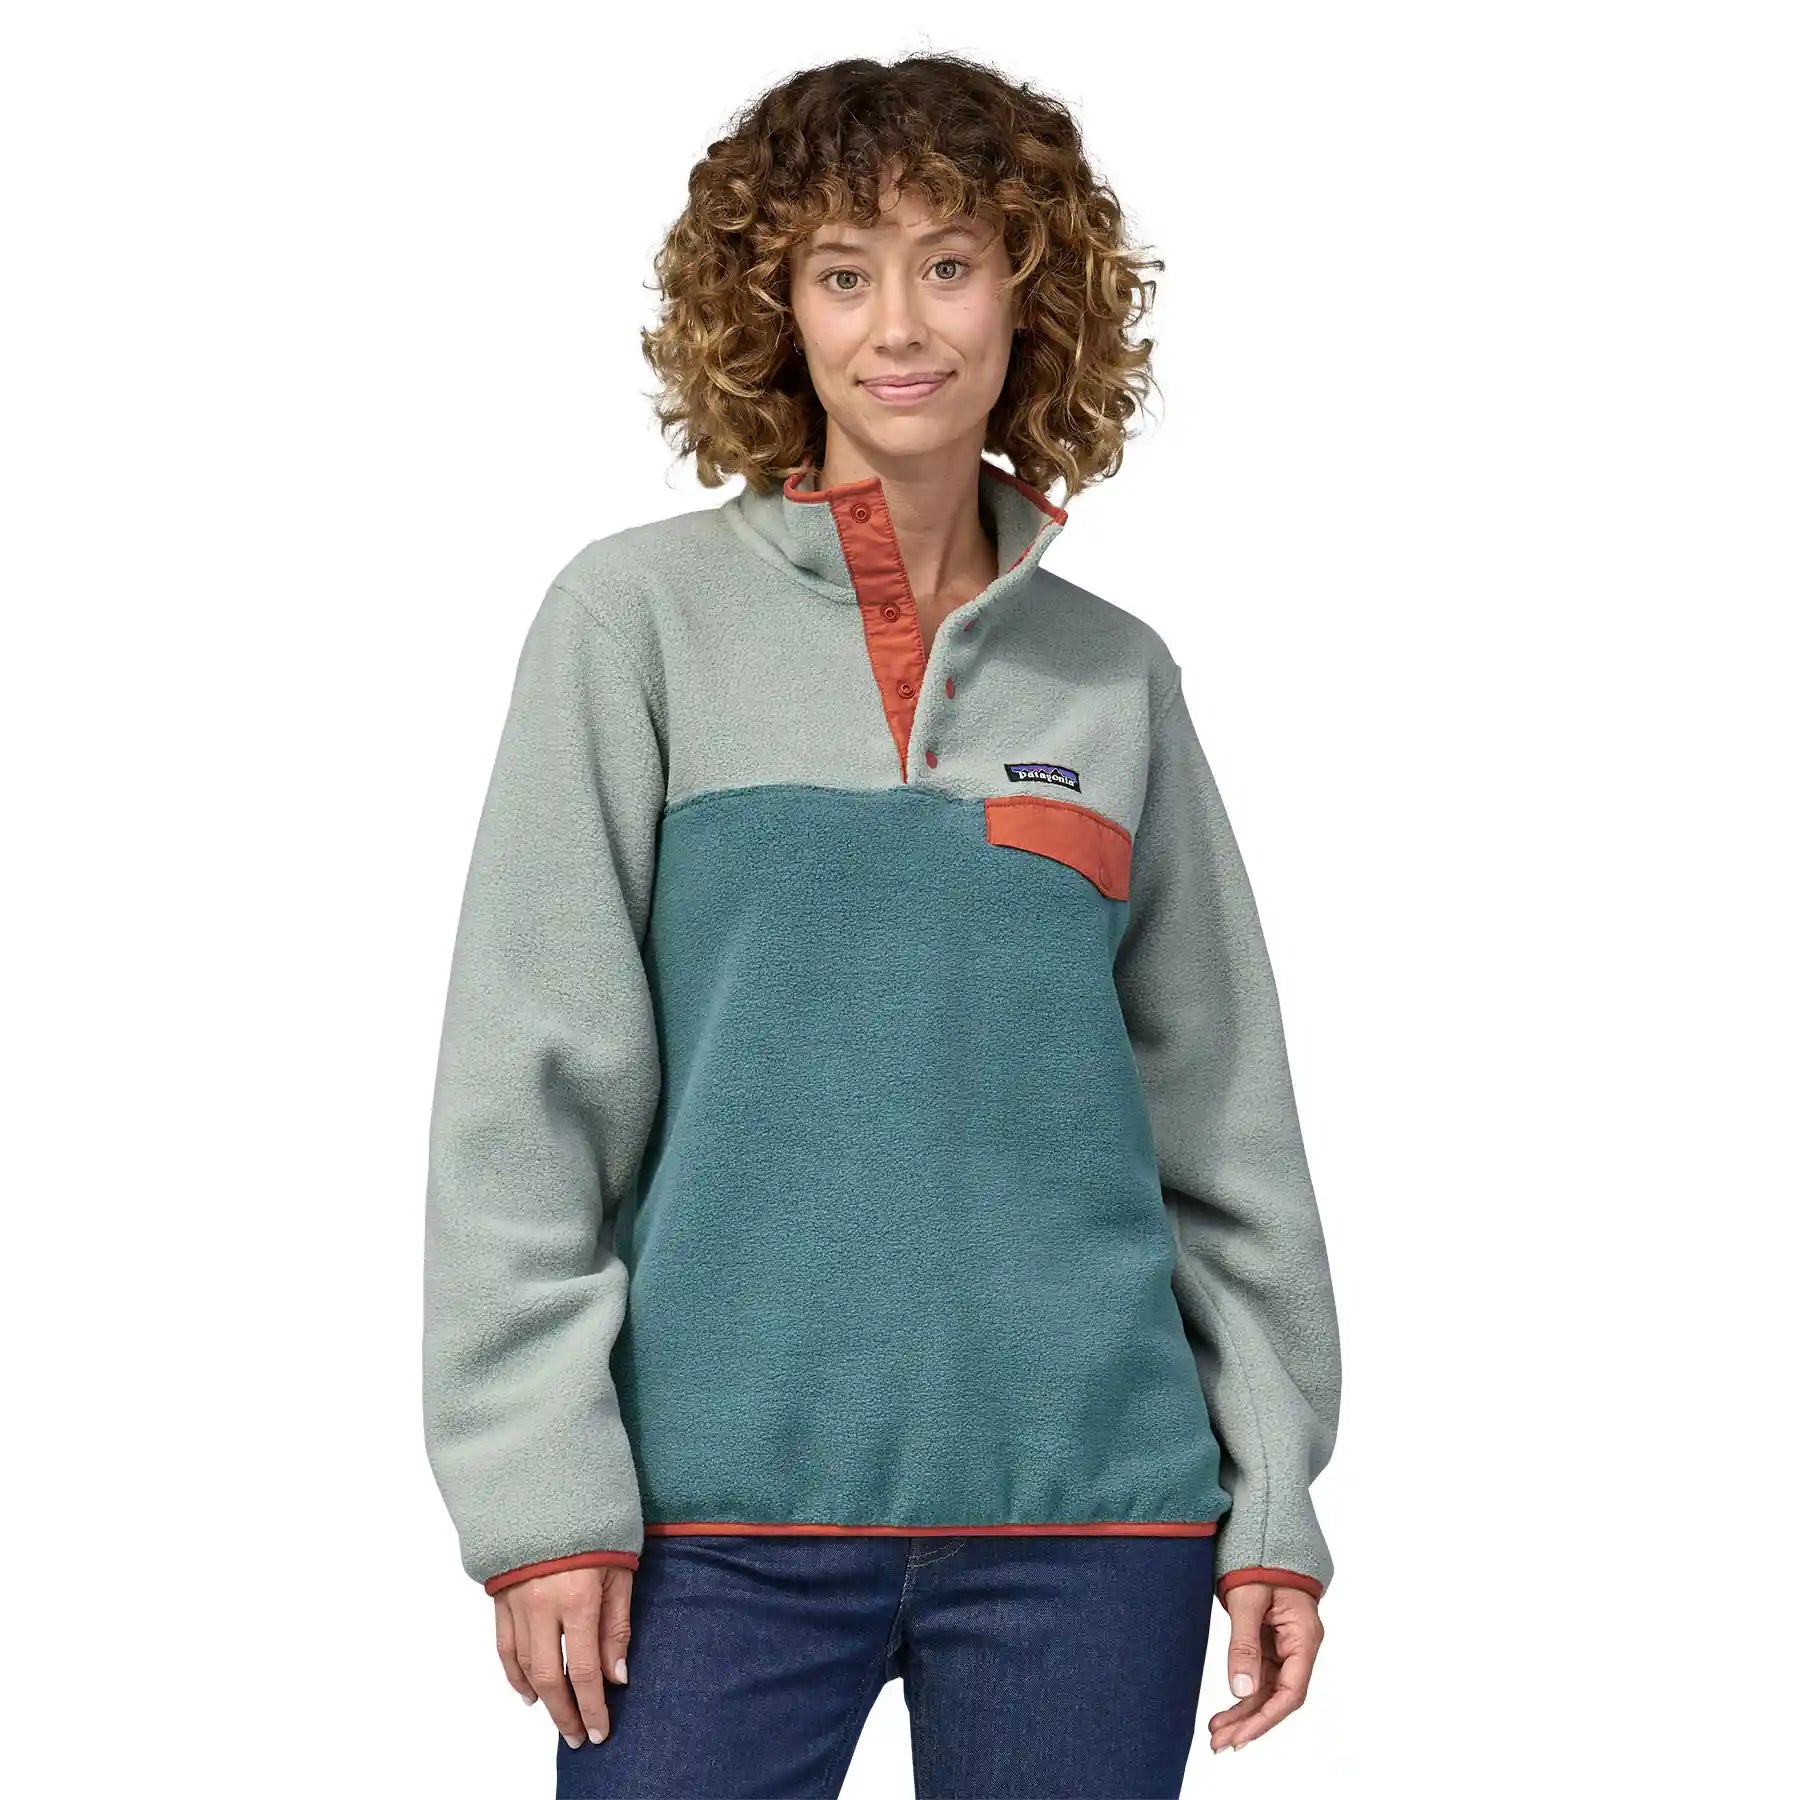 Patagonia Women's Jackets for sale in Shawinigan, Quebec